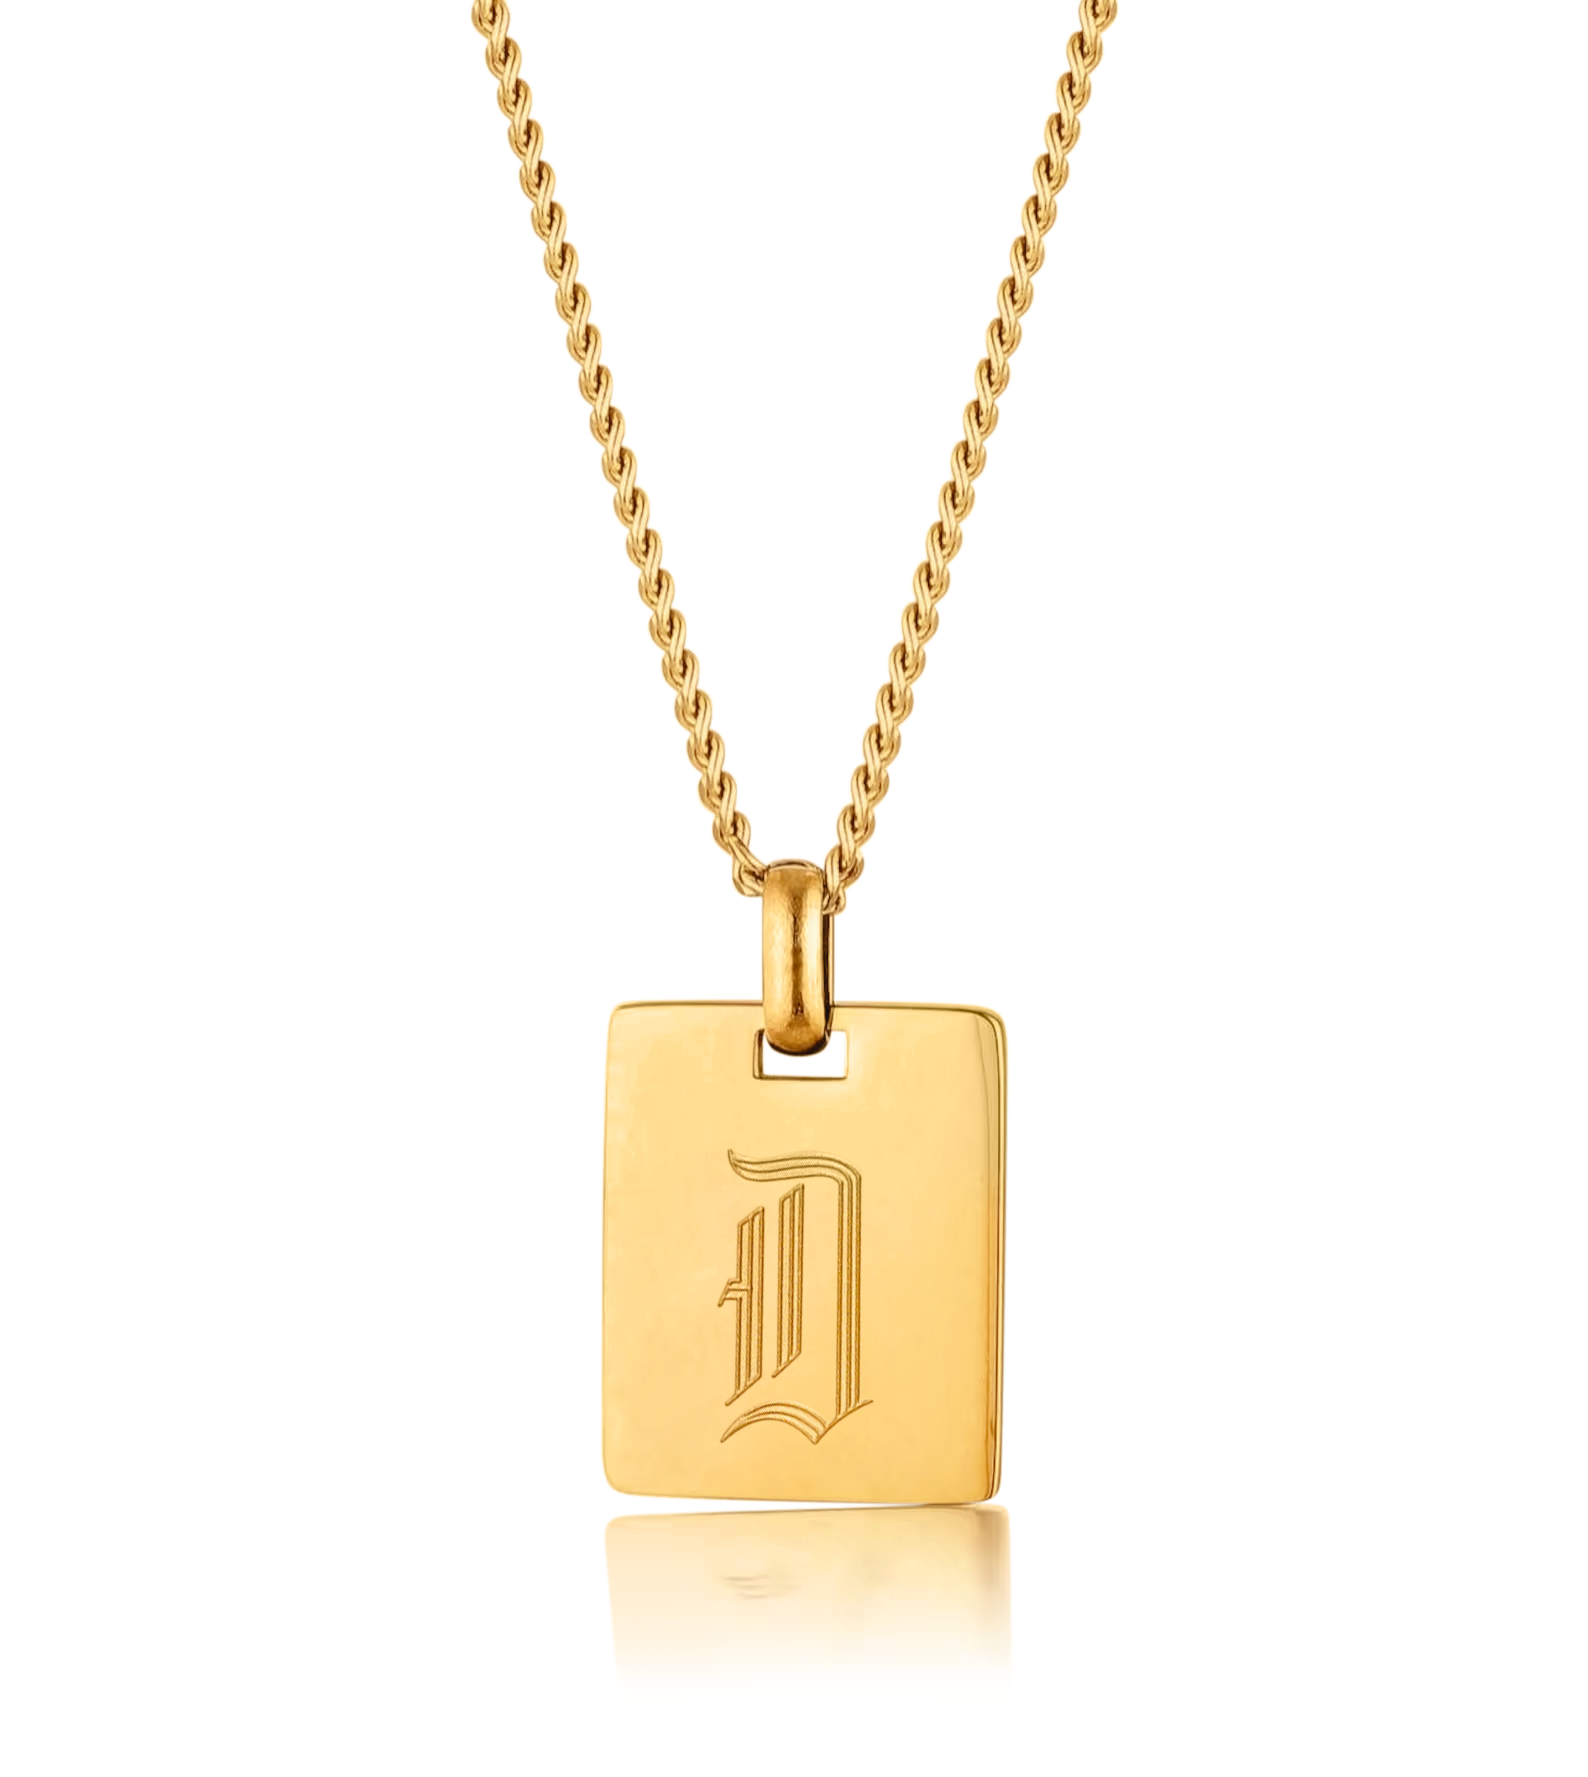 The Initial Pendant Necklace